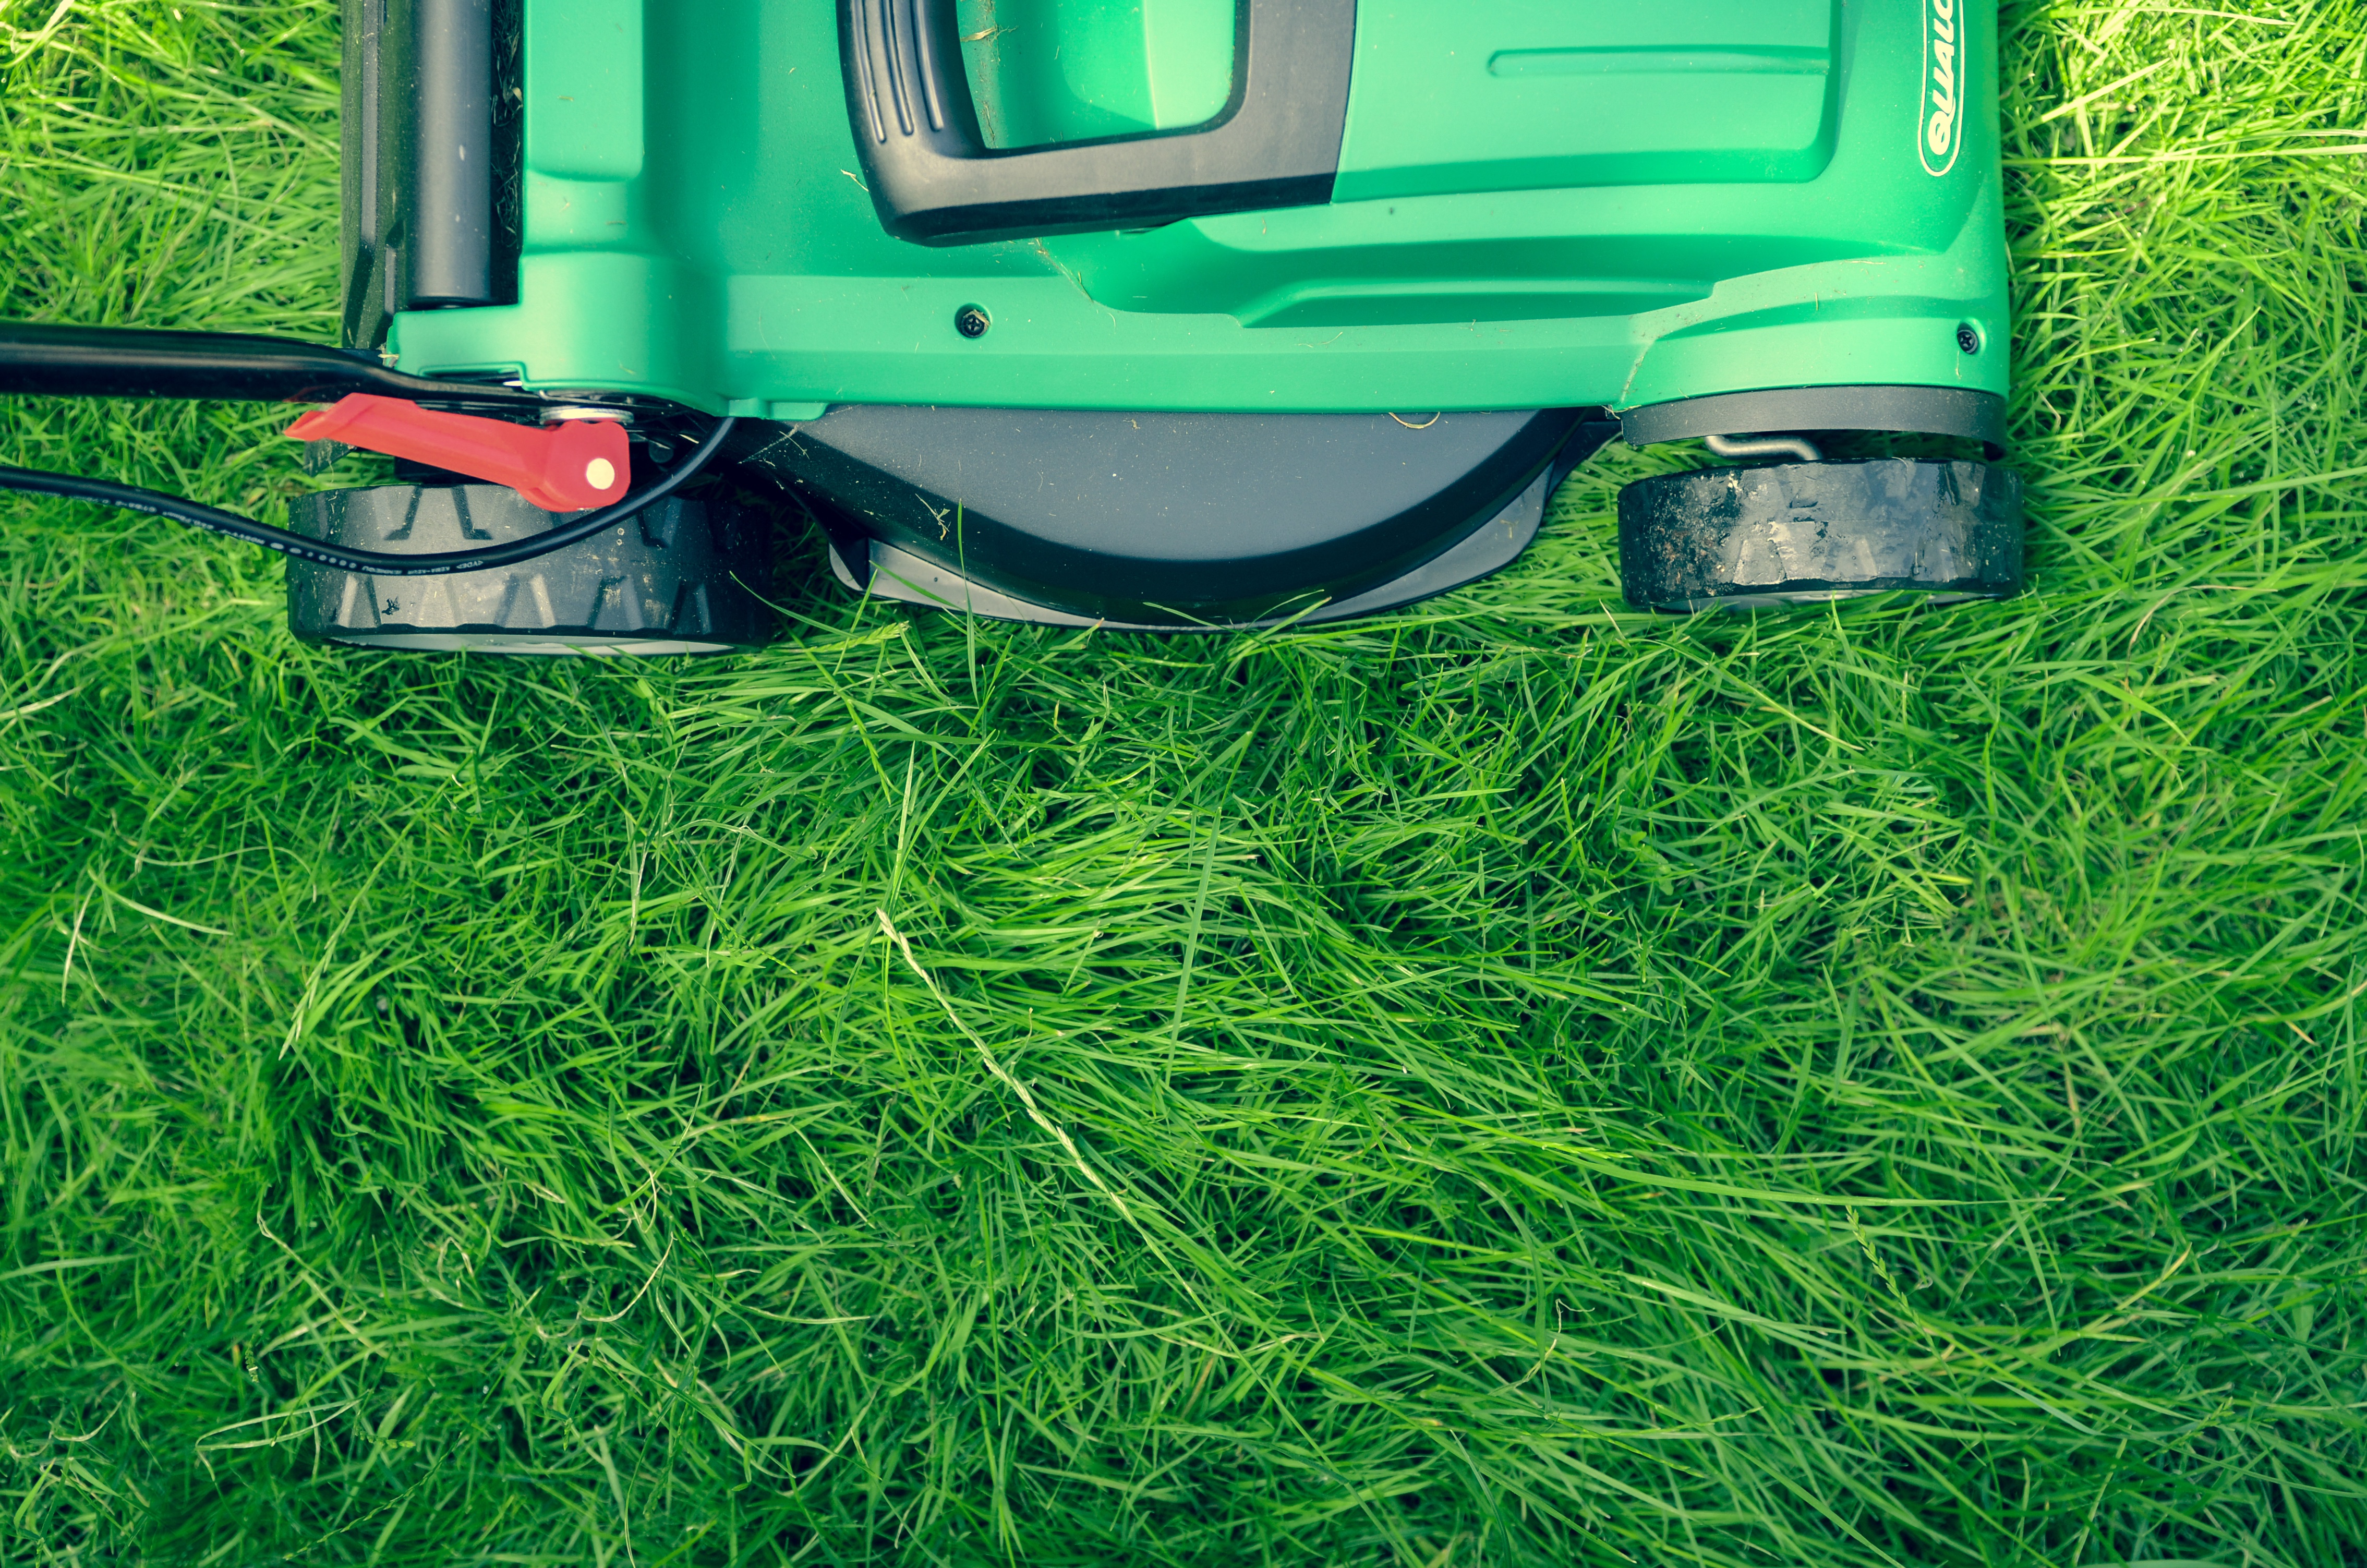 How to Maintain a Lawn Mower